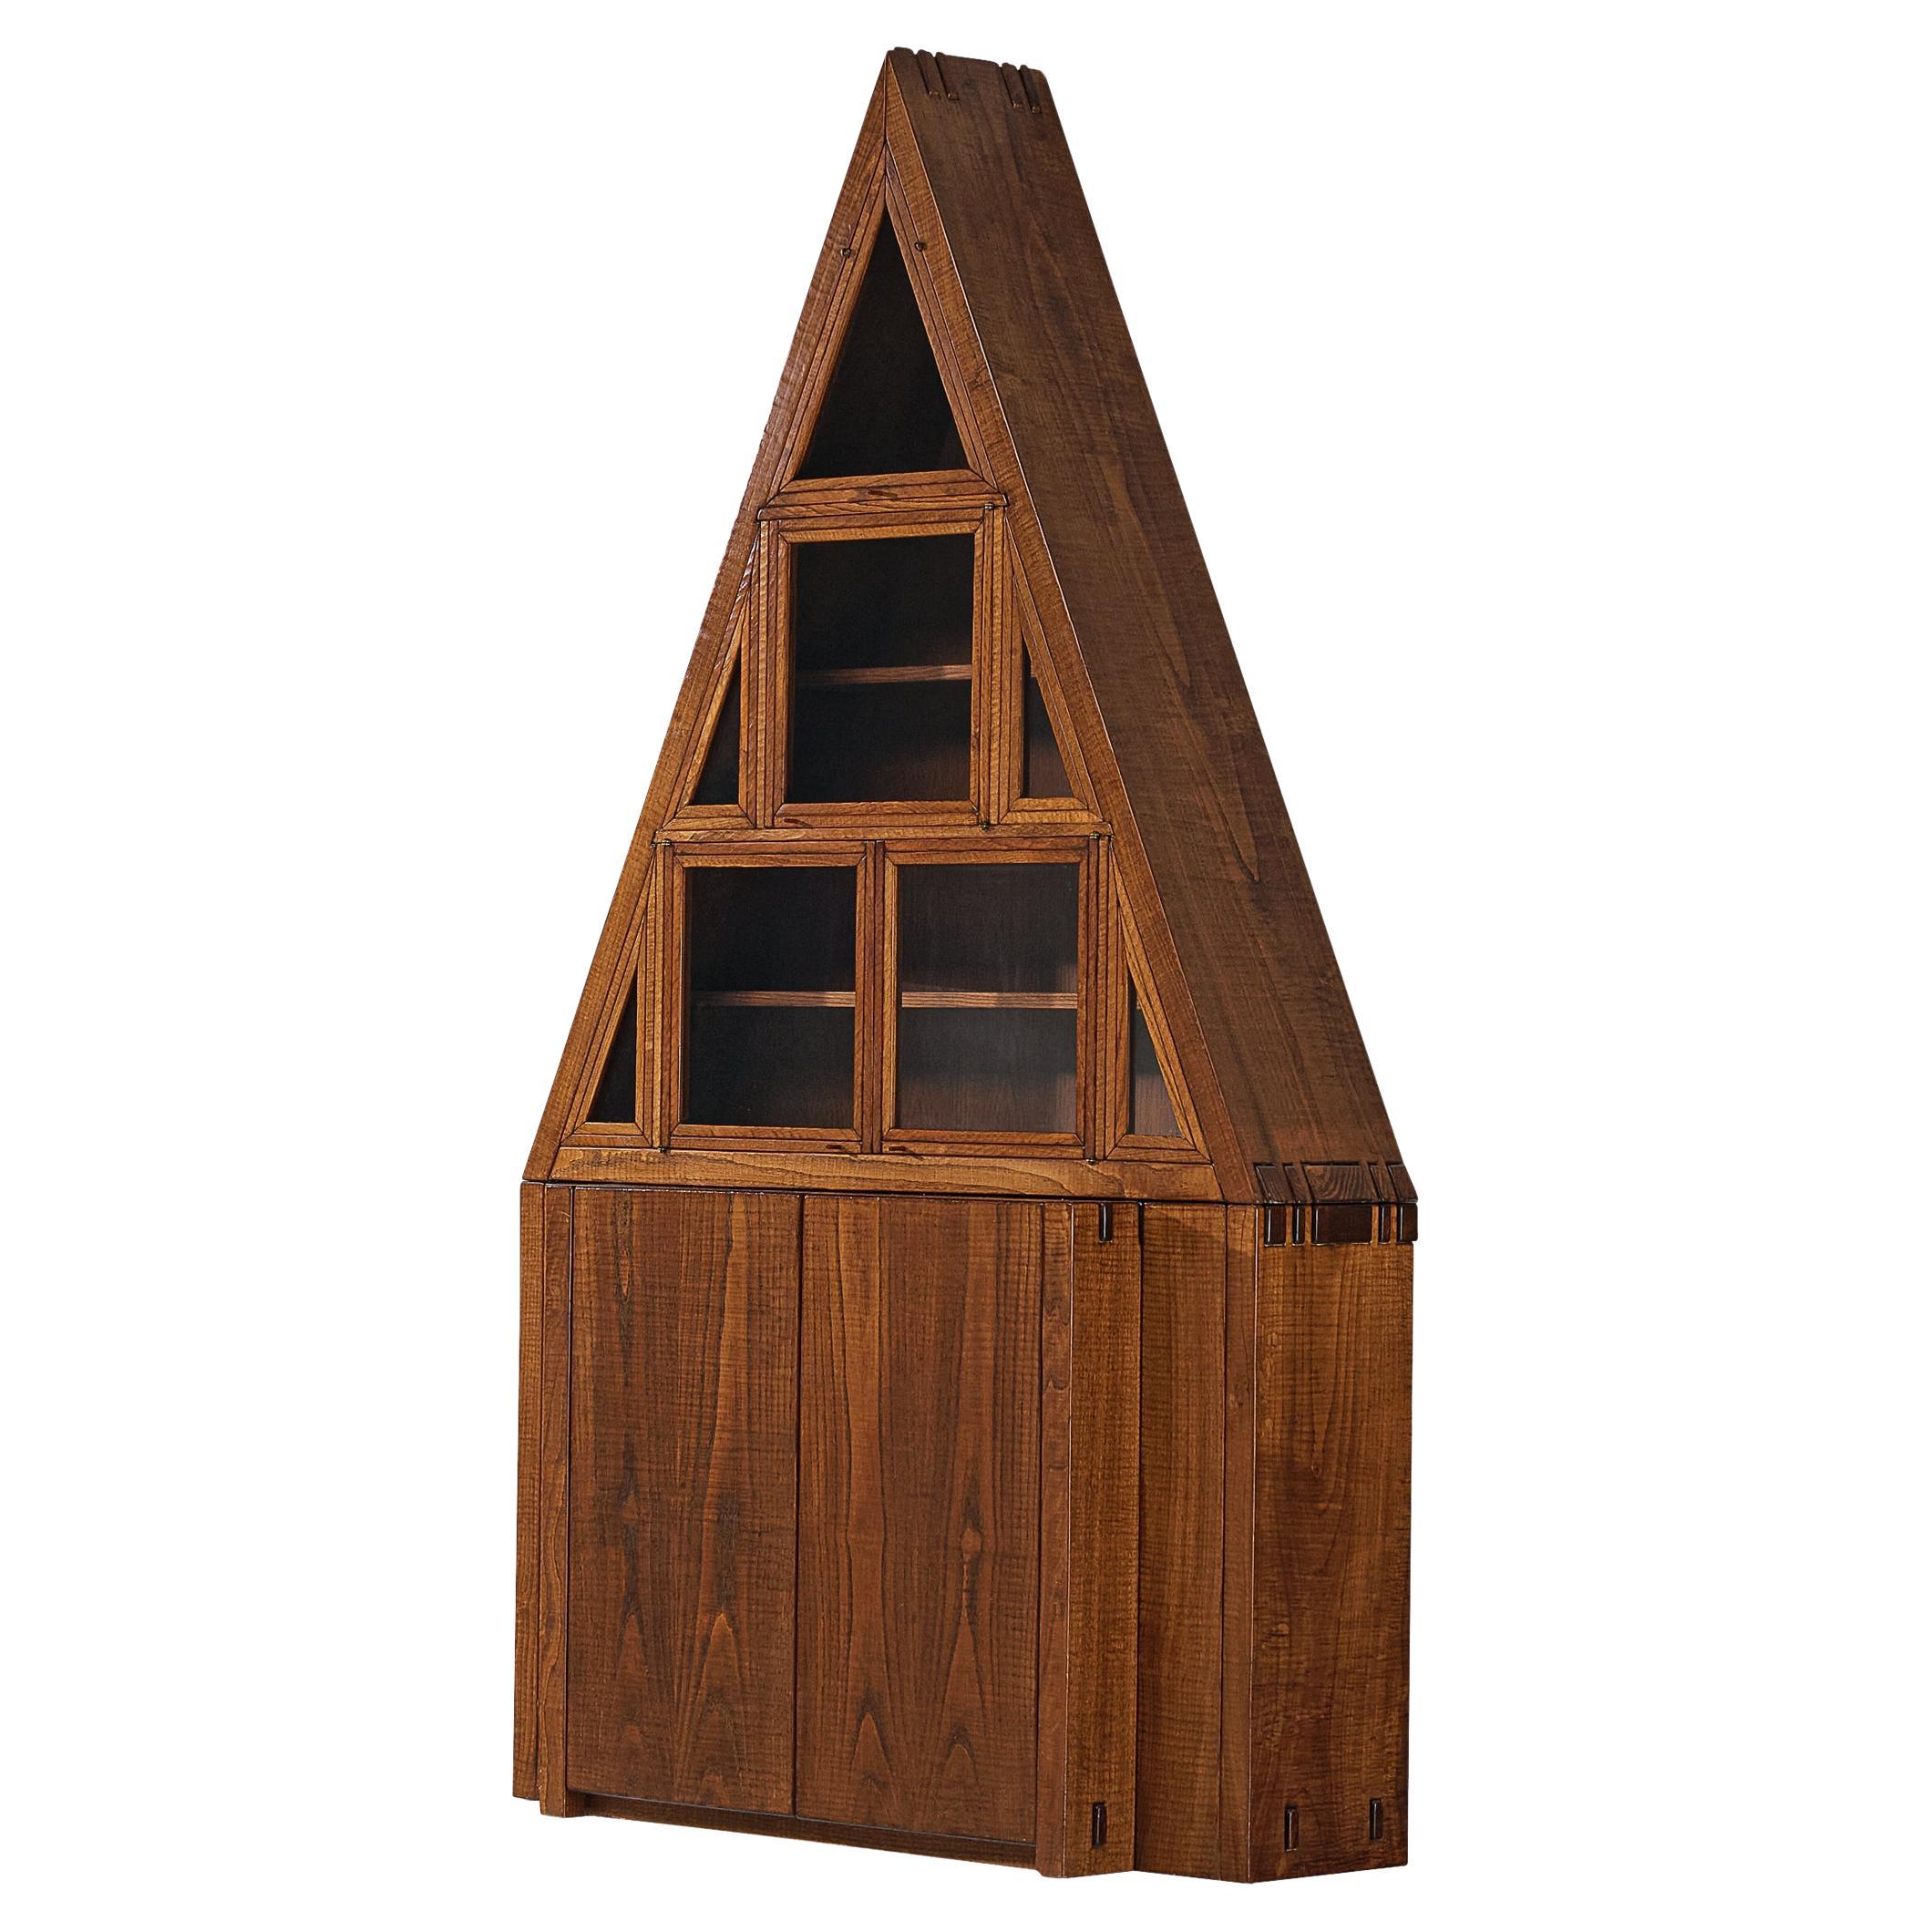 Giuseppe Rivadossi Pyramid Shaped Cabinet in Chestnut 8.2 feet  For Sale